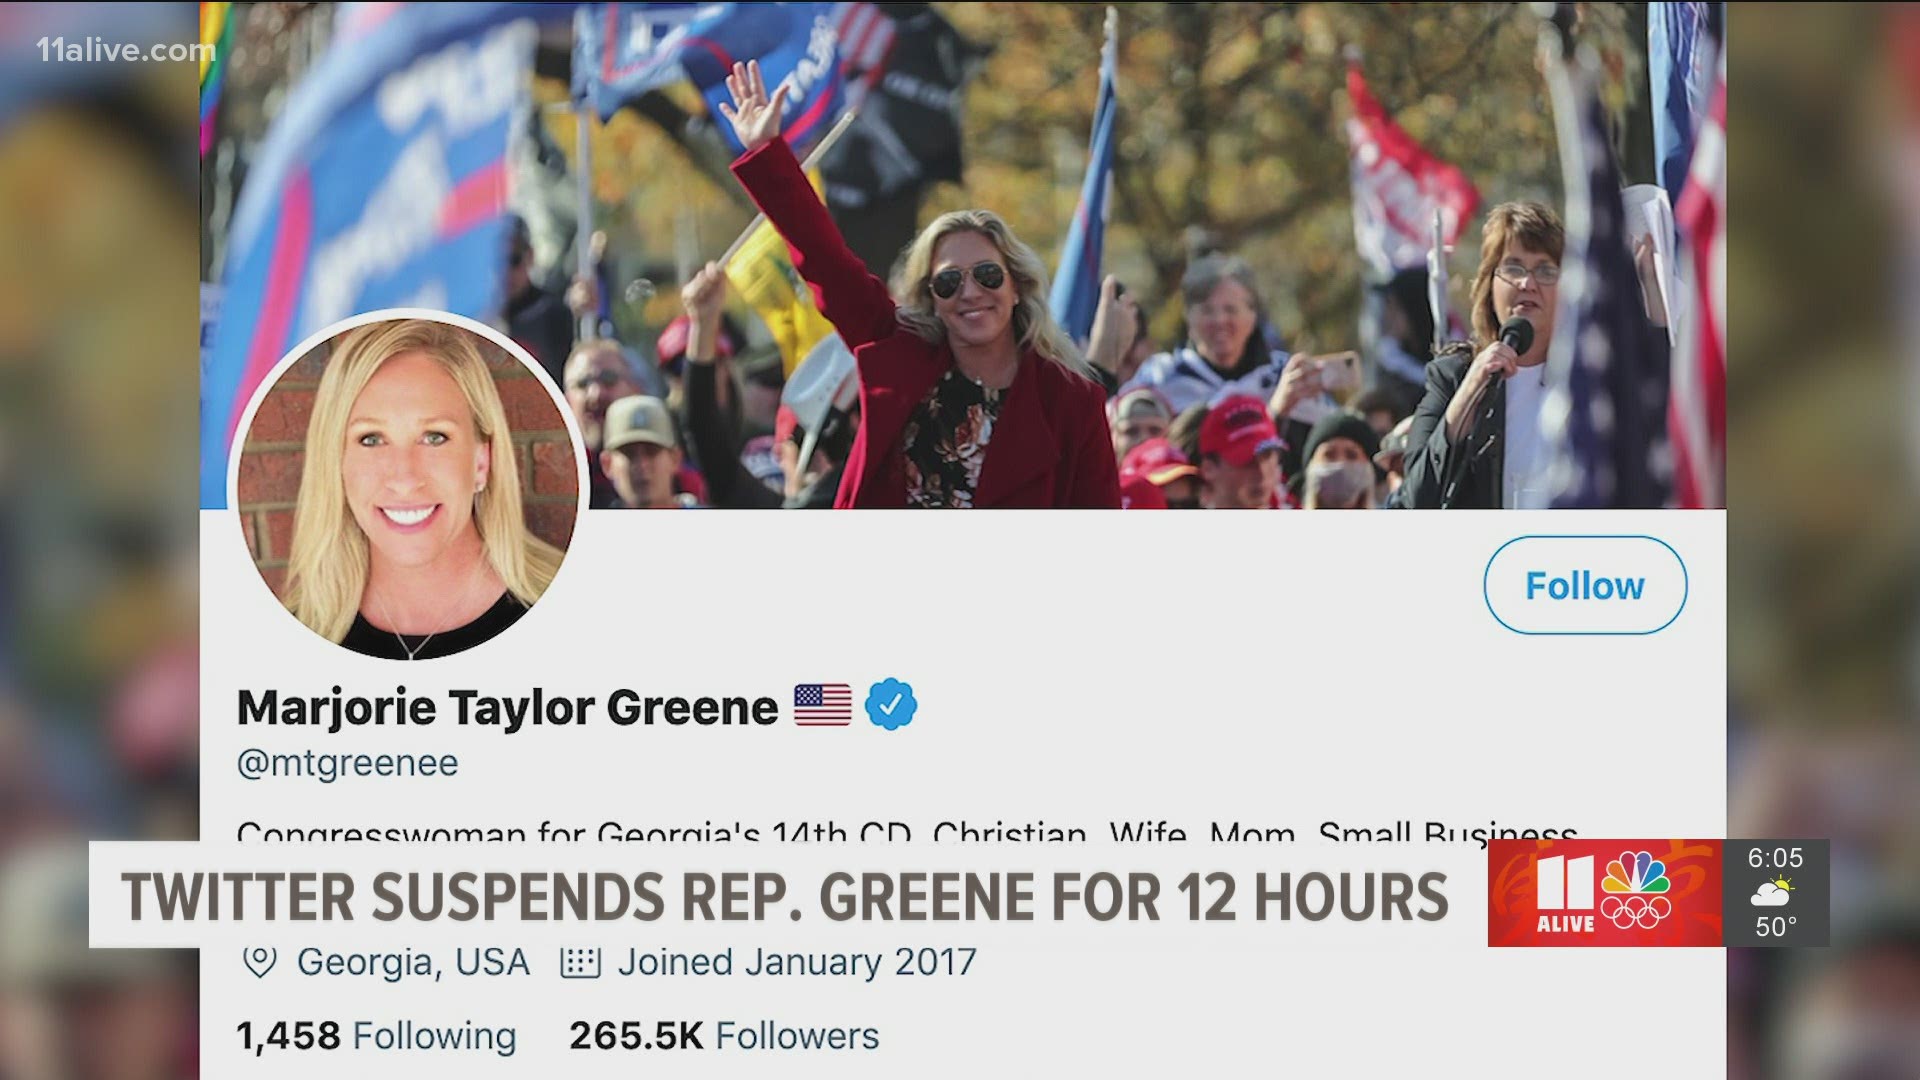 Twitter accuses Greene of going against its civic integrity policy by spreading election misinformation.